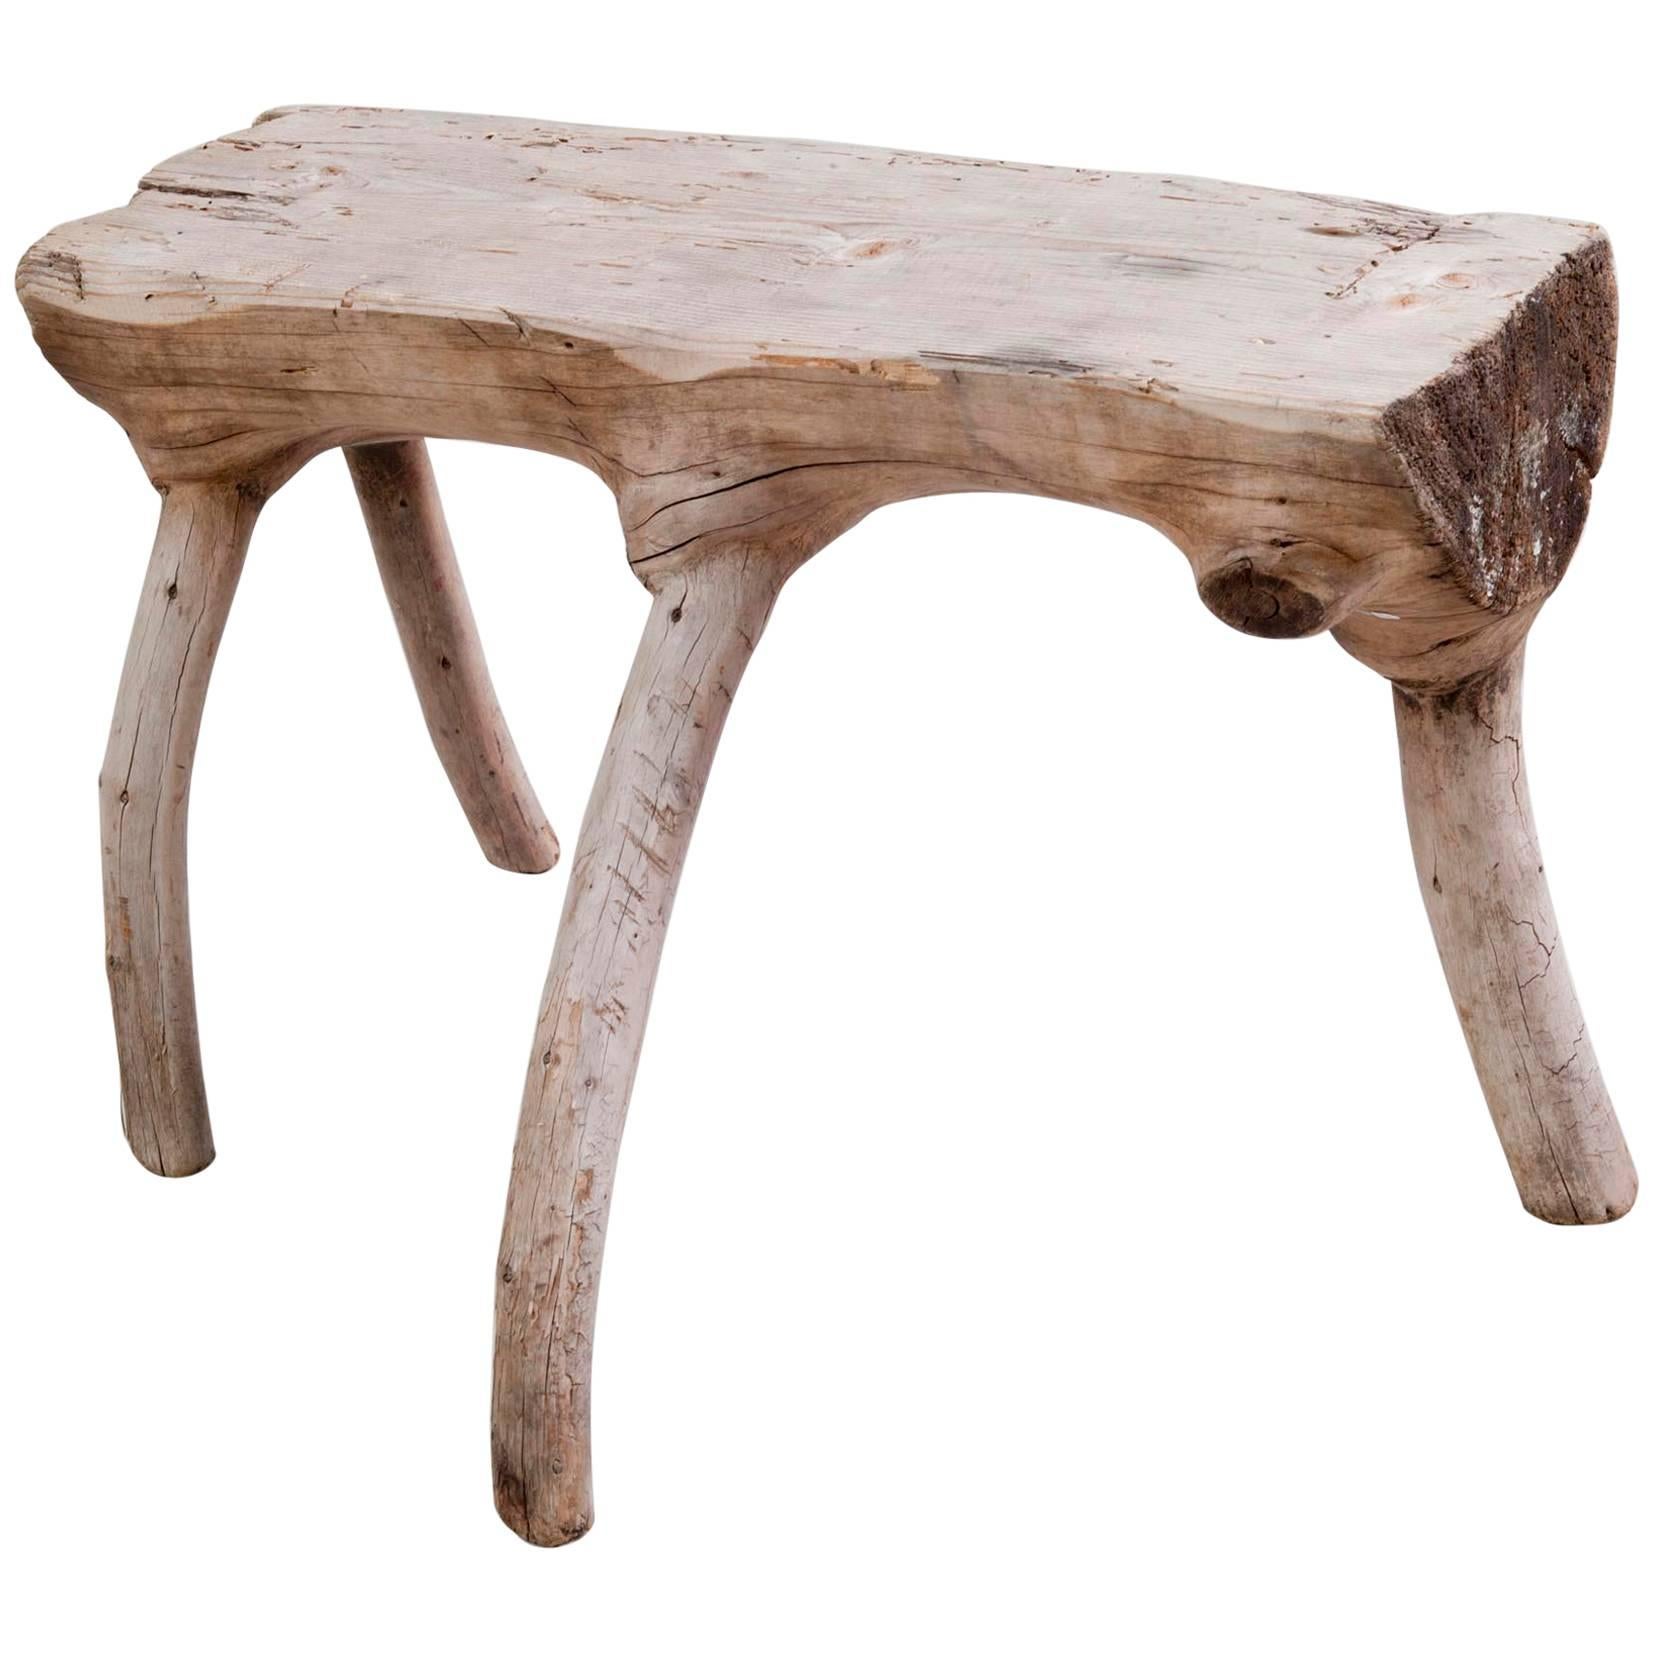 Early 20th Century Shepherd Stool of the Savoy Made of Fir Tree